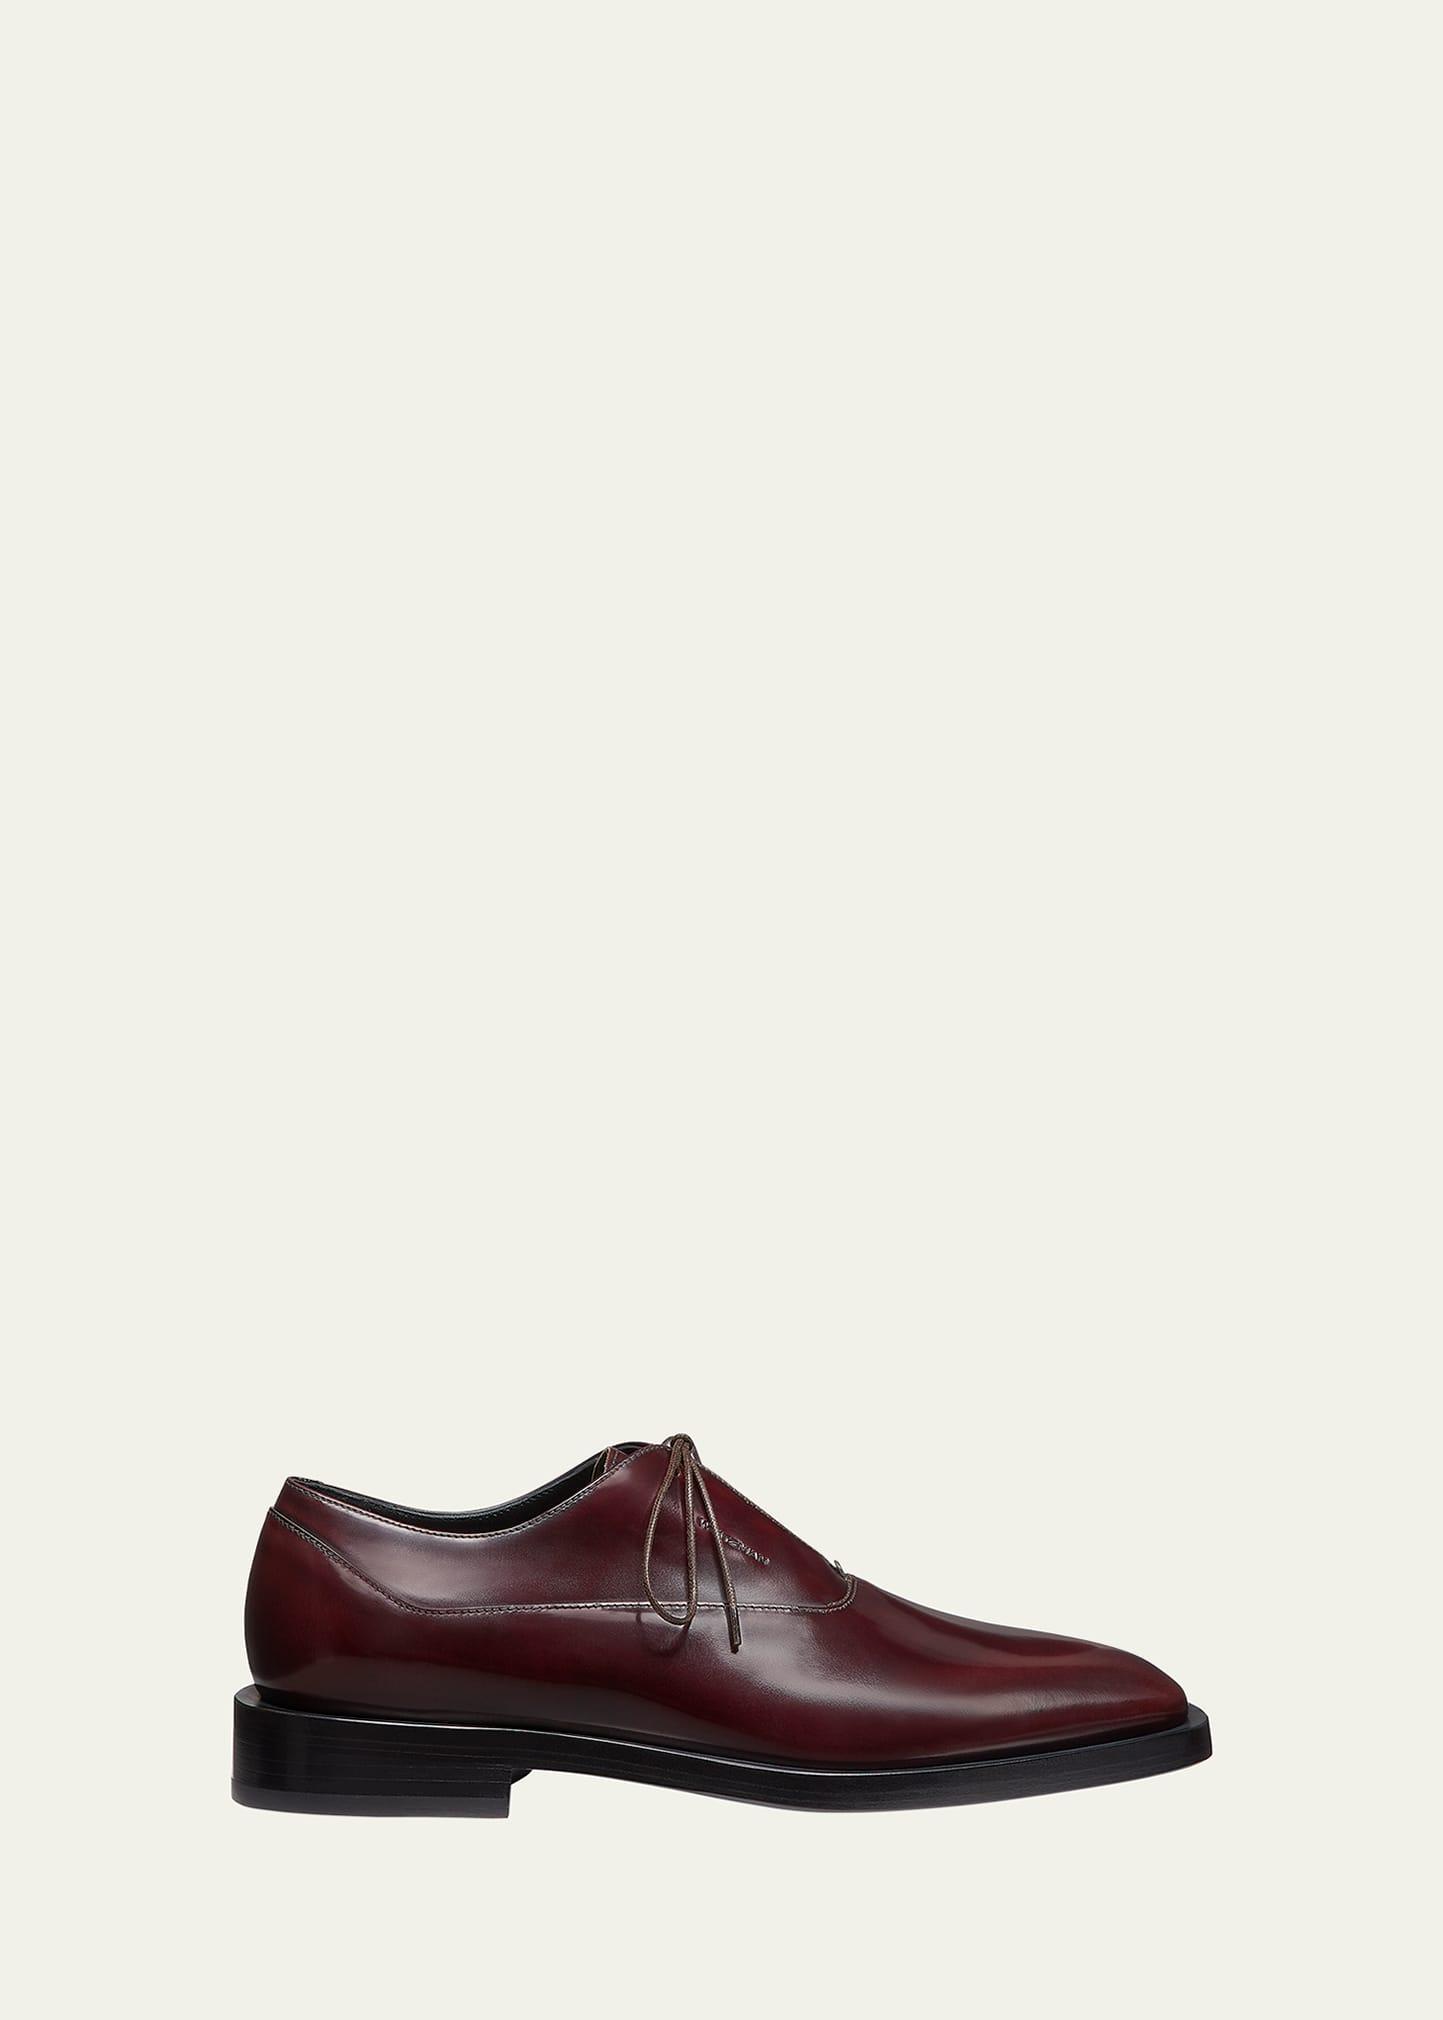 Mens Royce Brushed Calfskin Oxford Loafers Product Image